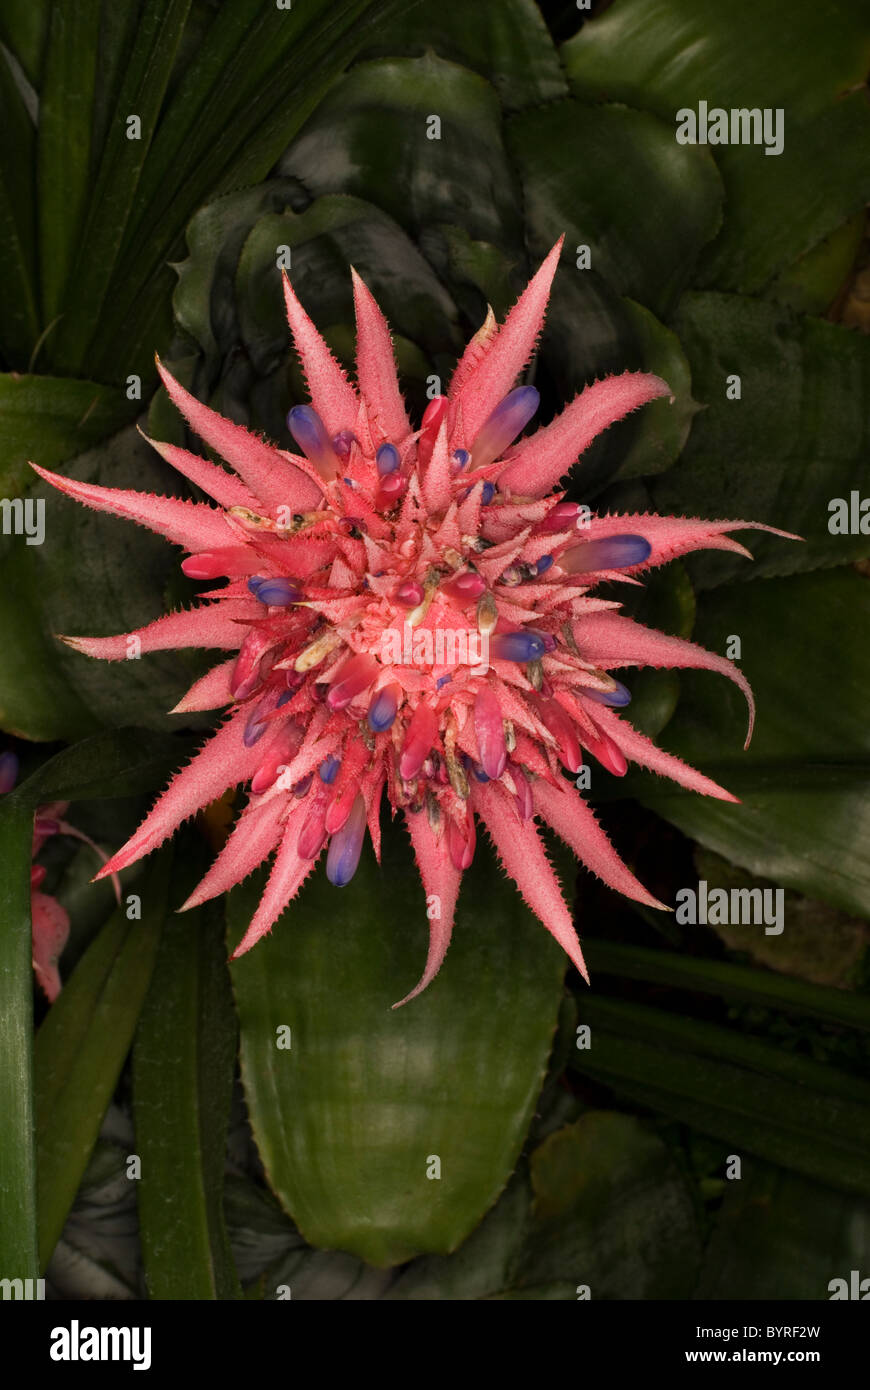 Vriesia hybrid,bromeliceae flower, Chiang Mai,Thailand Stock Photo